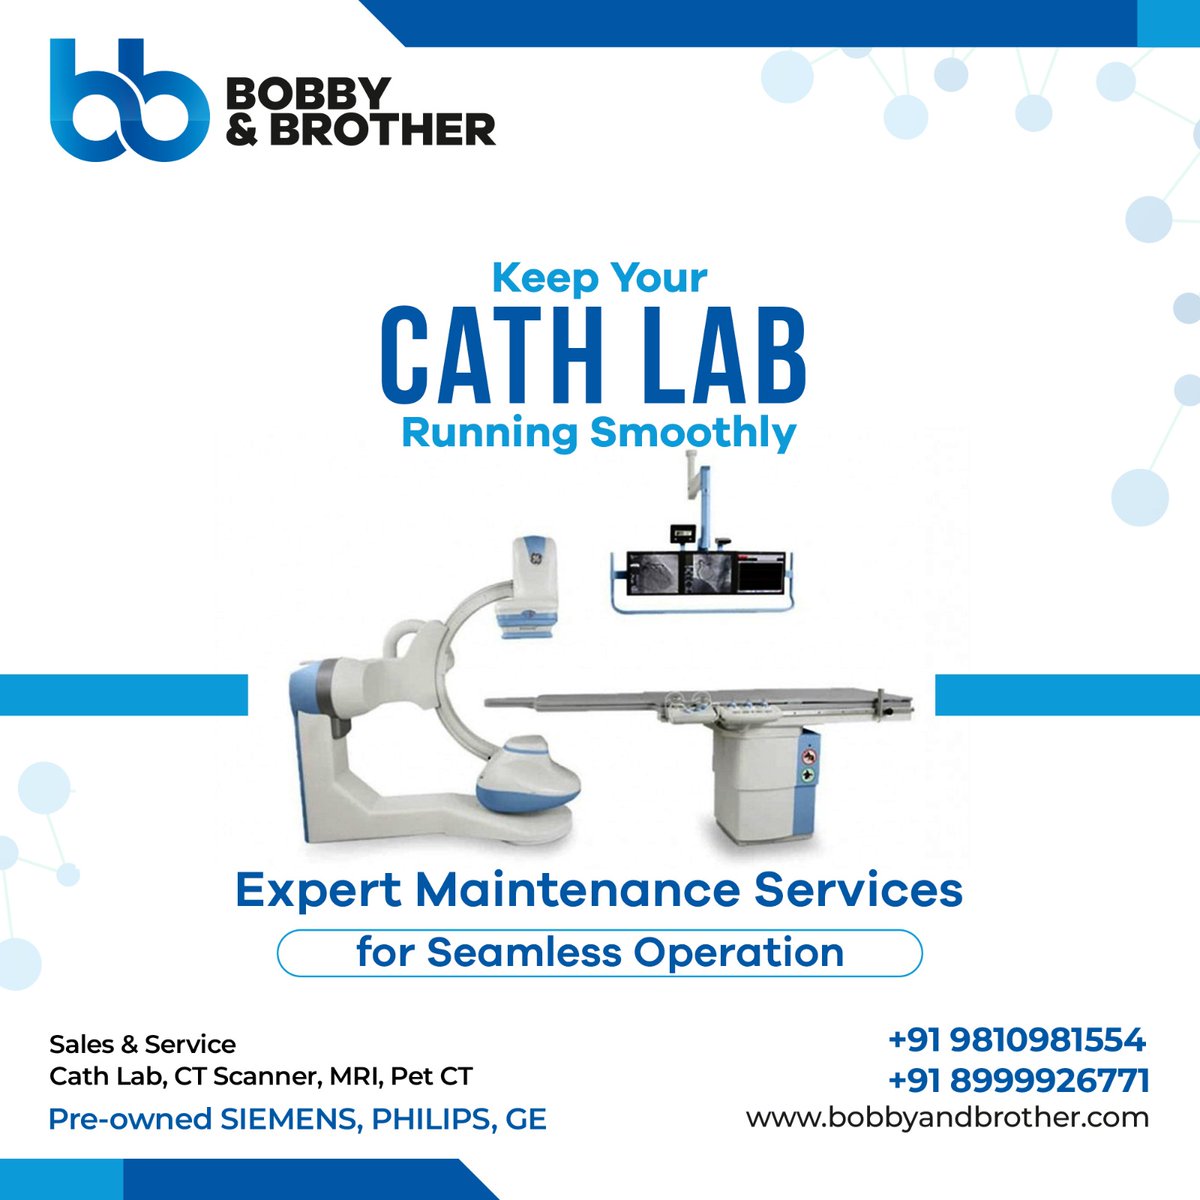 Optimize your Cath Lab's performance
with our maintenance services.
Minimize downtime and focus on delivering high-quality
patient care without interruption

#BobbyAndBrother #MedicalEquipment
#HealthcareEquipment #MedicalTechnology #MedicalInnovation #CathLab
#India